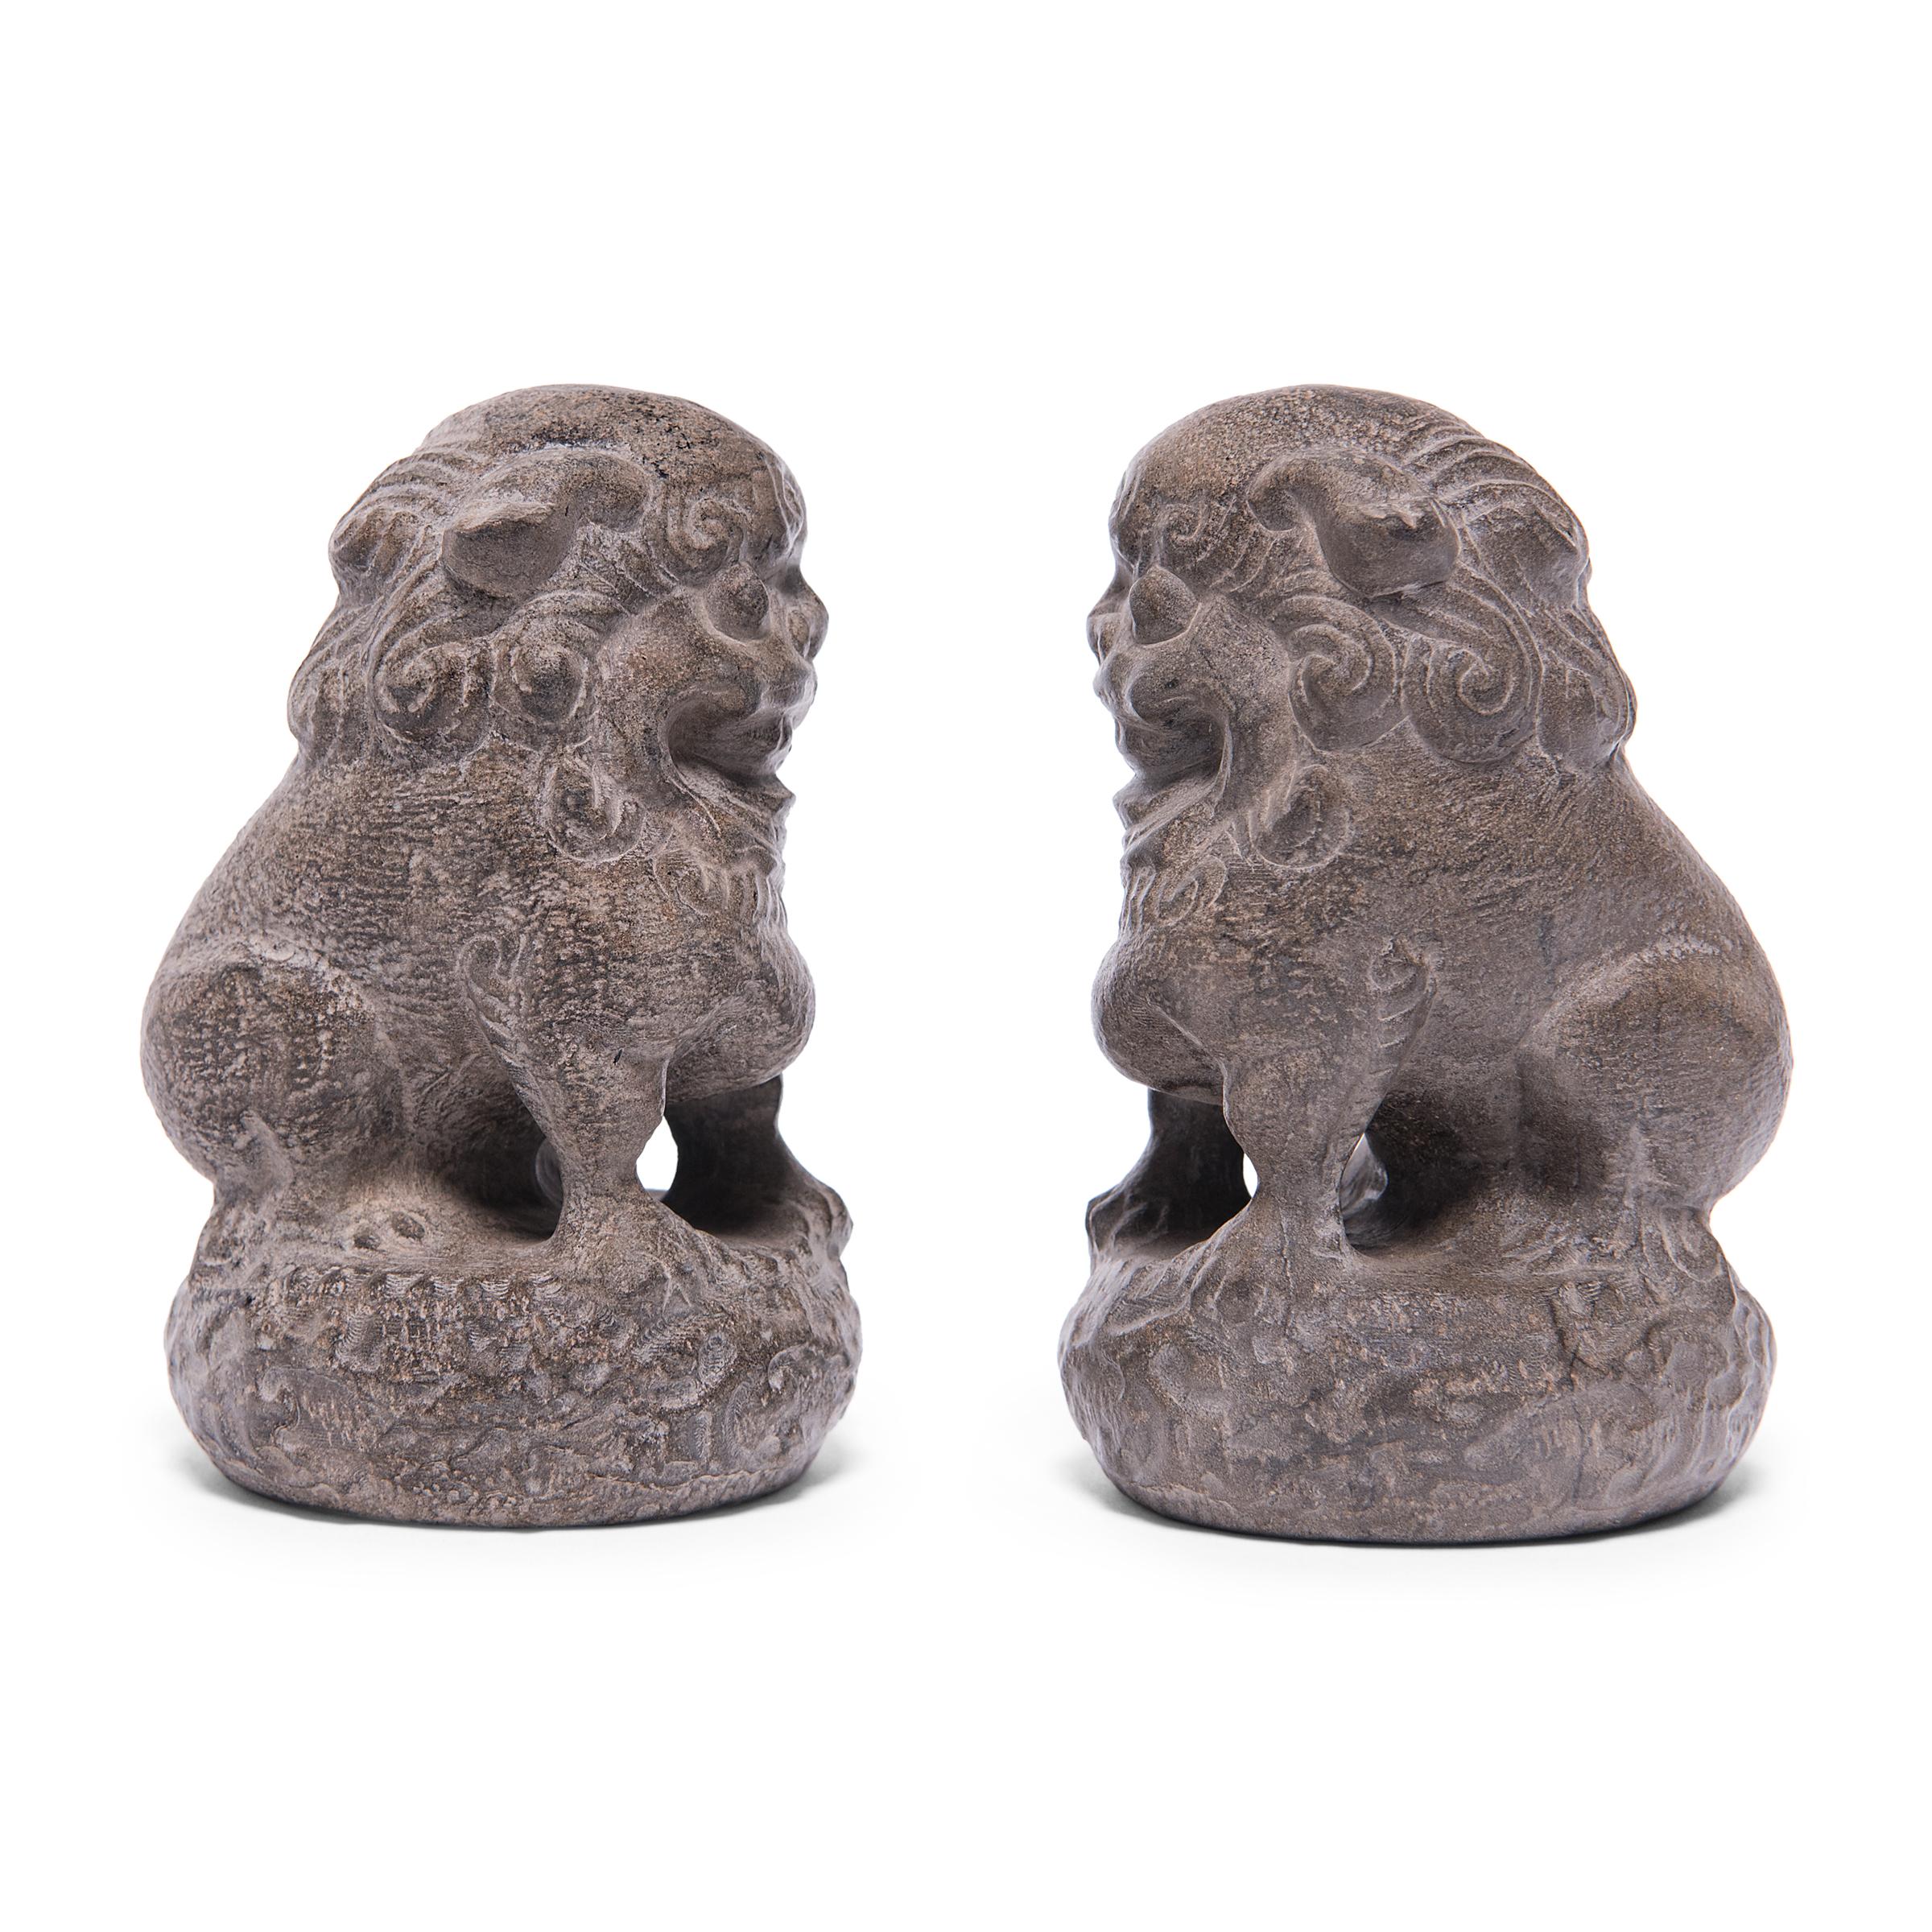 With curly manes and playful expressions, these petite stone fu dogs are adorable companions and benevolent guardians of the home. Also known as shizi, the pair represents yin and yang, and they sit in mirrored reclining postures on studded round